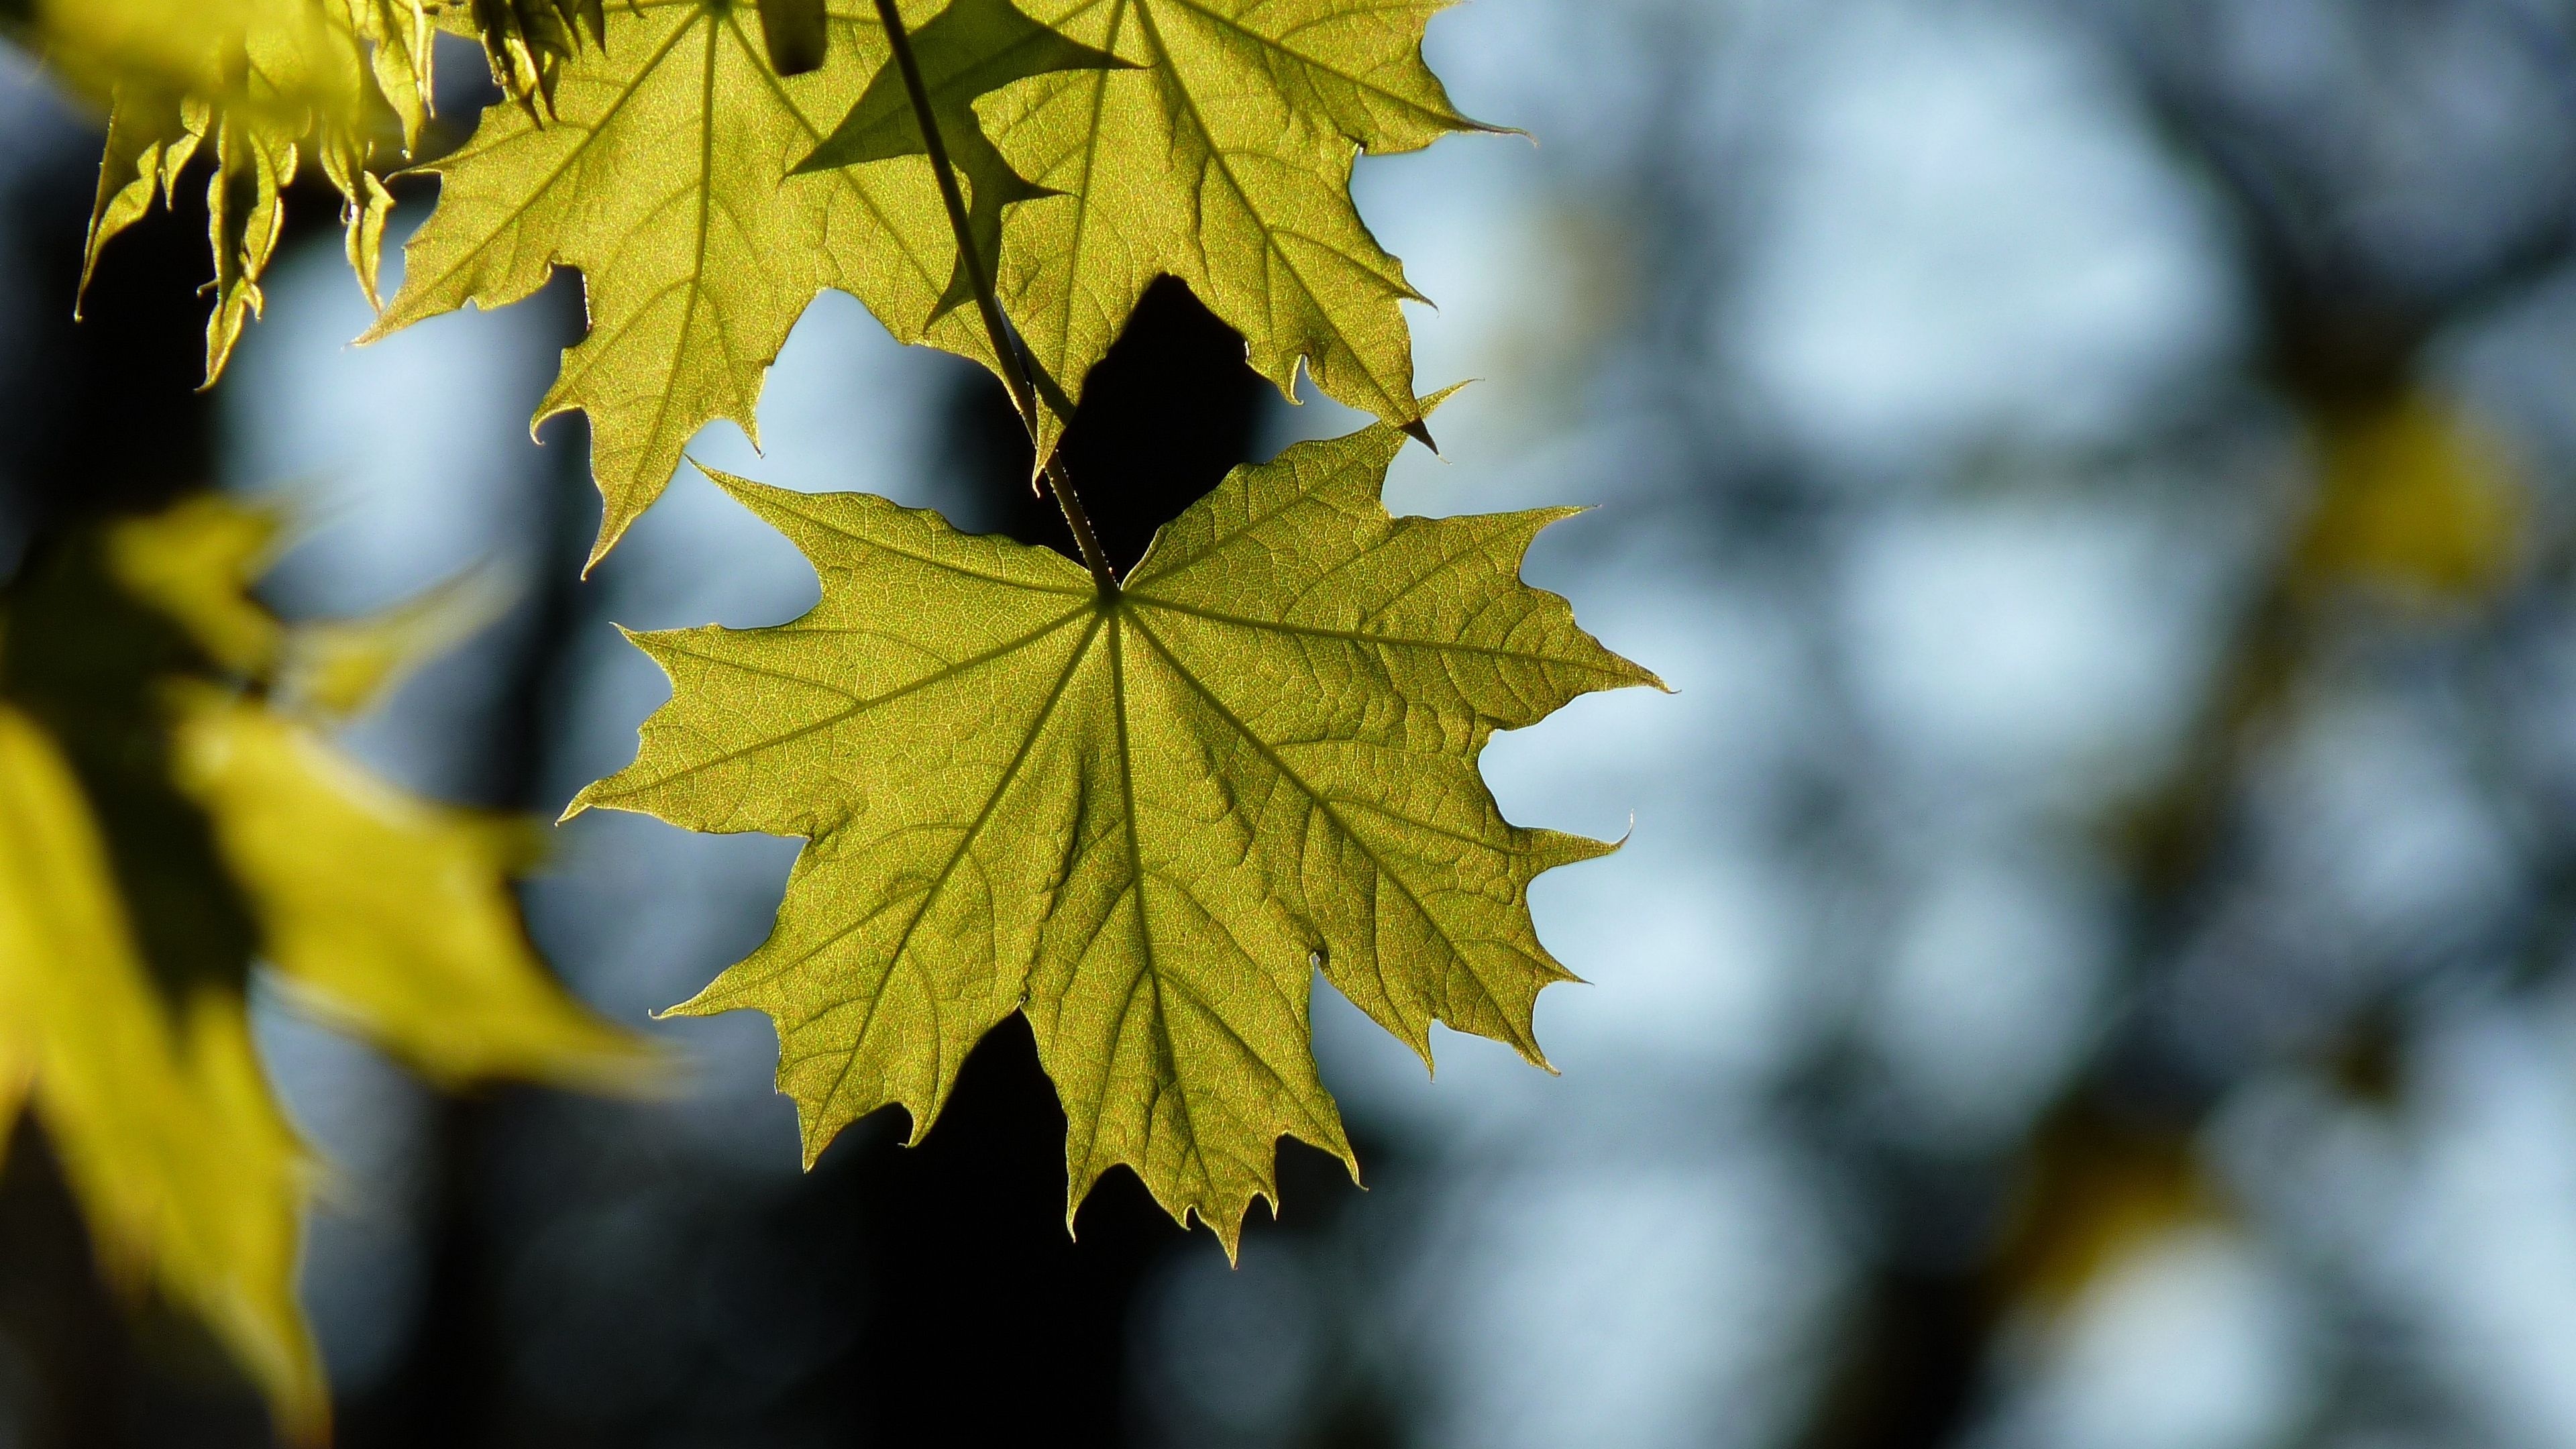 Maple leaf, Blurred beauty, Nature's abstract, Artistic appeal, 3840x2160 4K Desktop